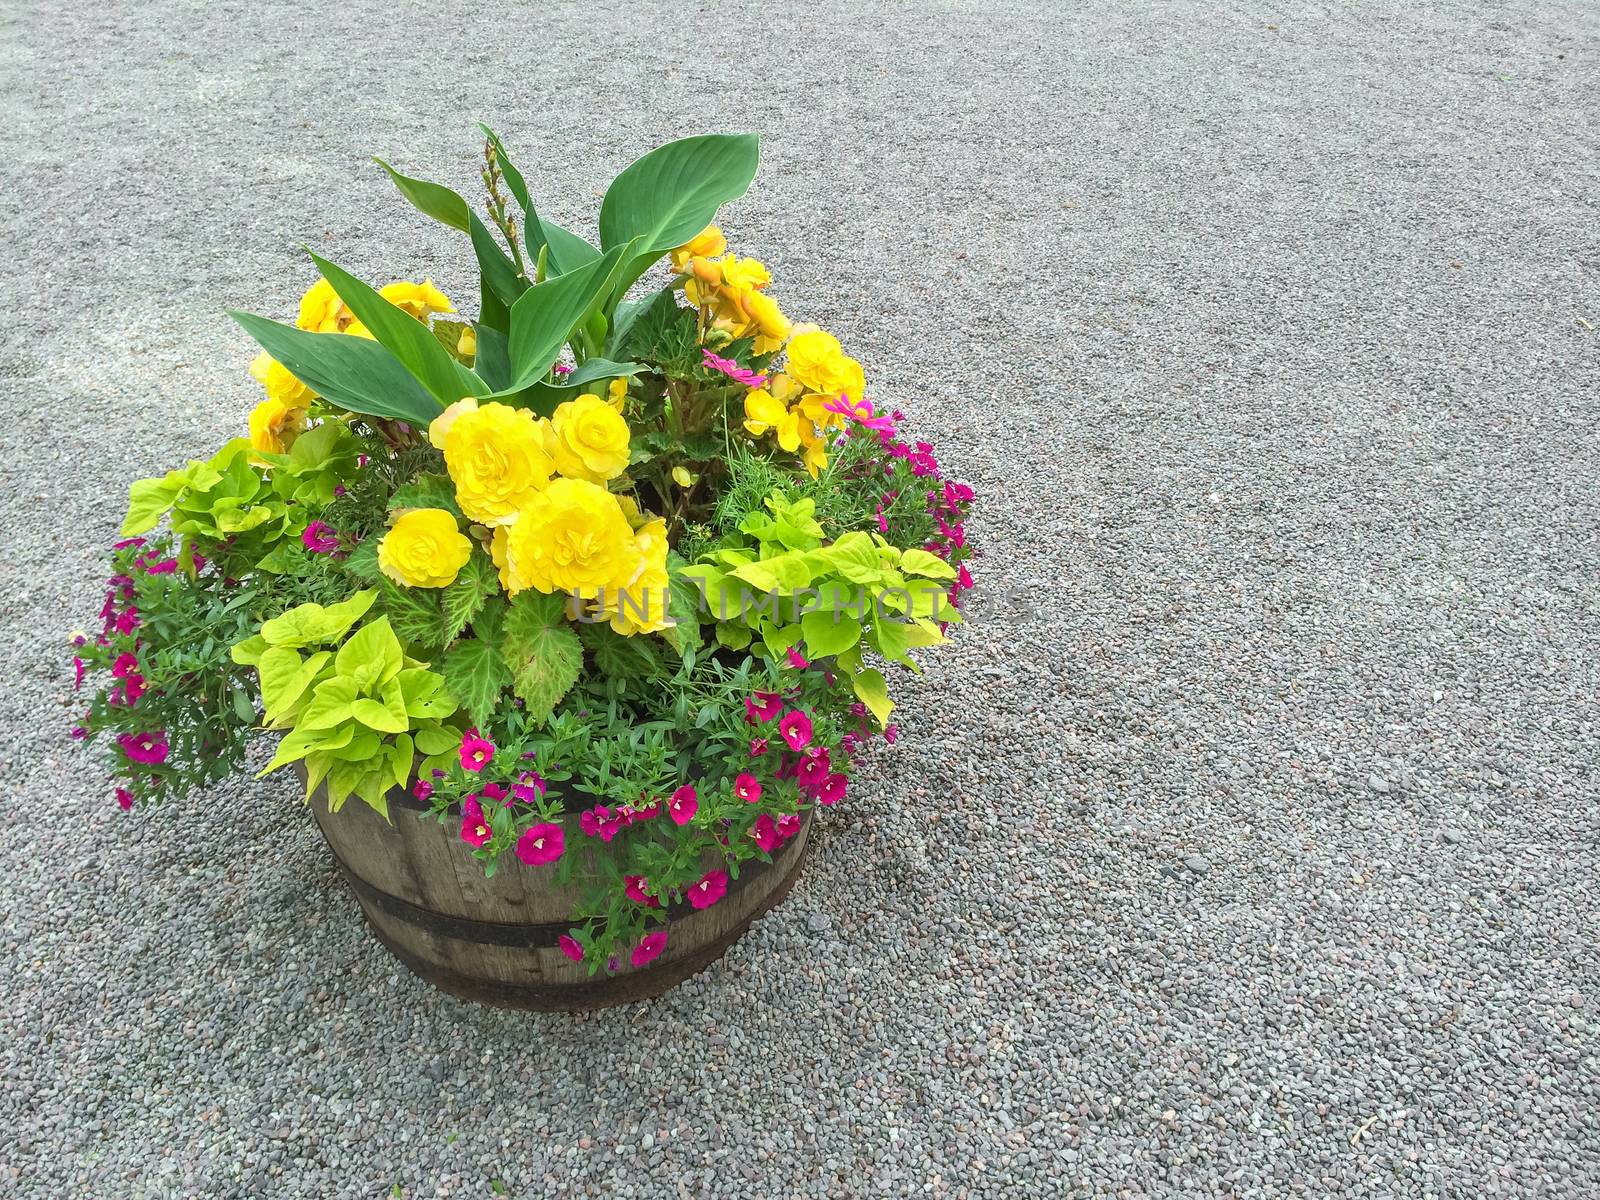 Colorful flowers in a wooden barrel, on gravel background.